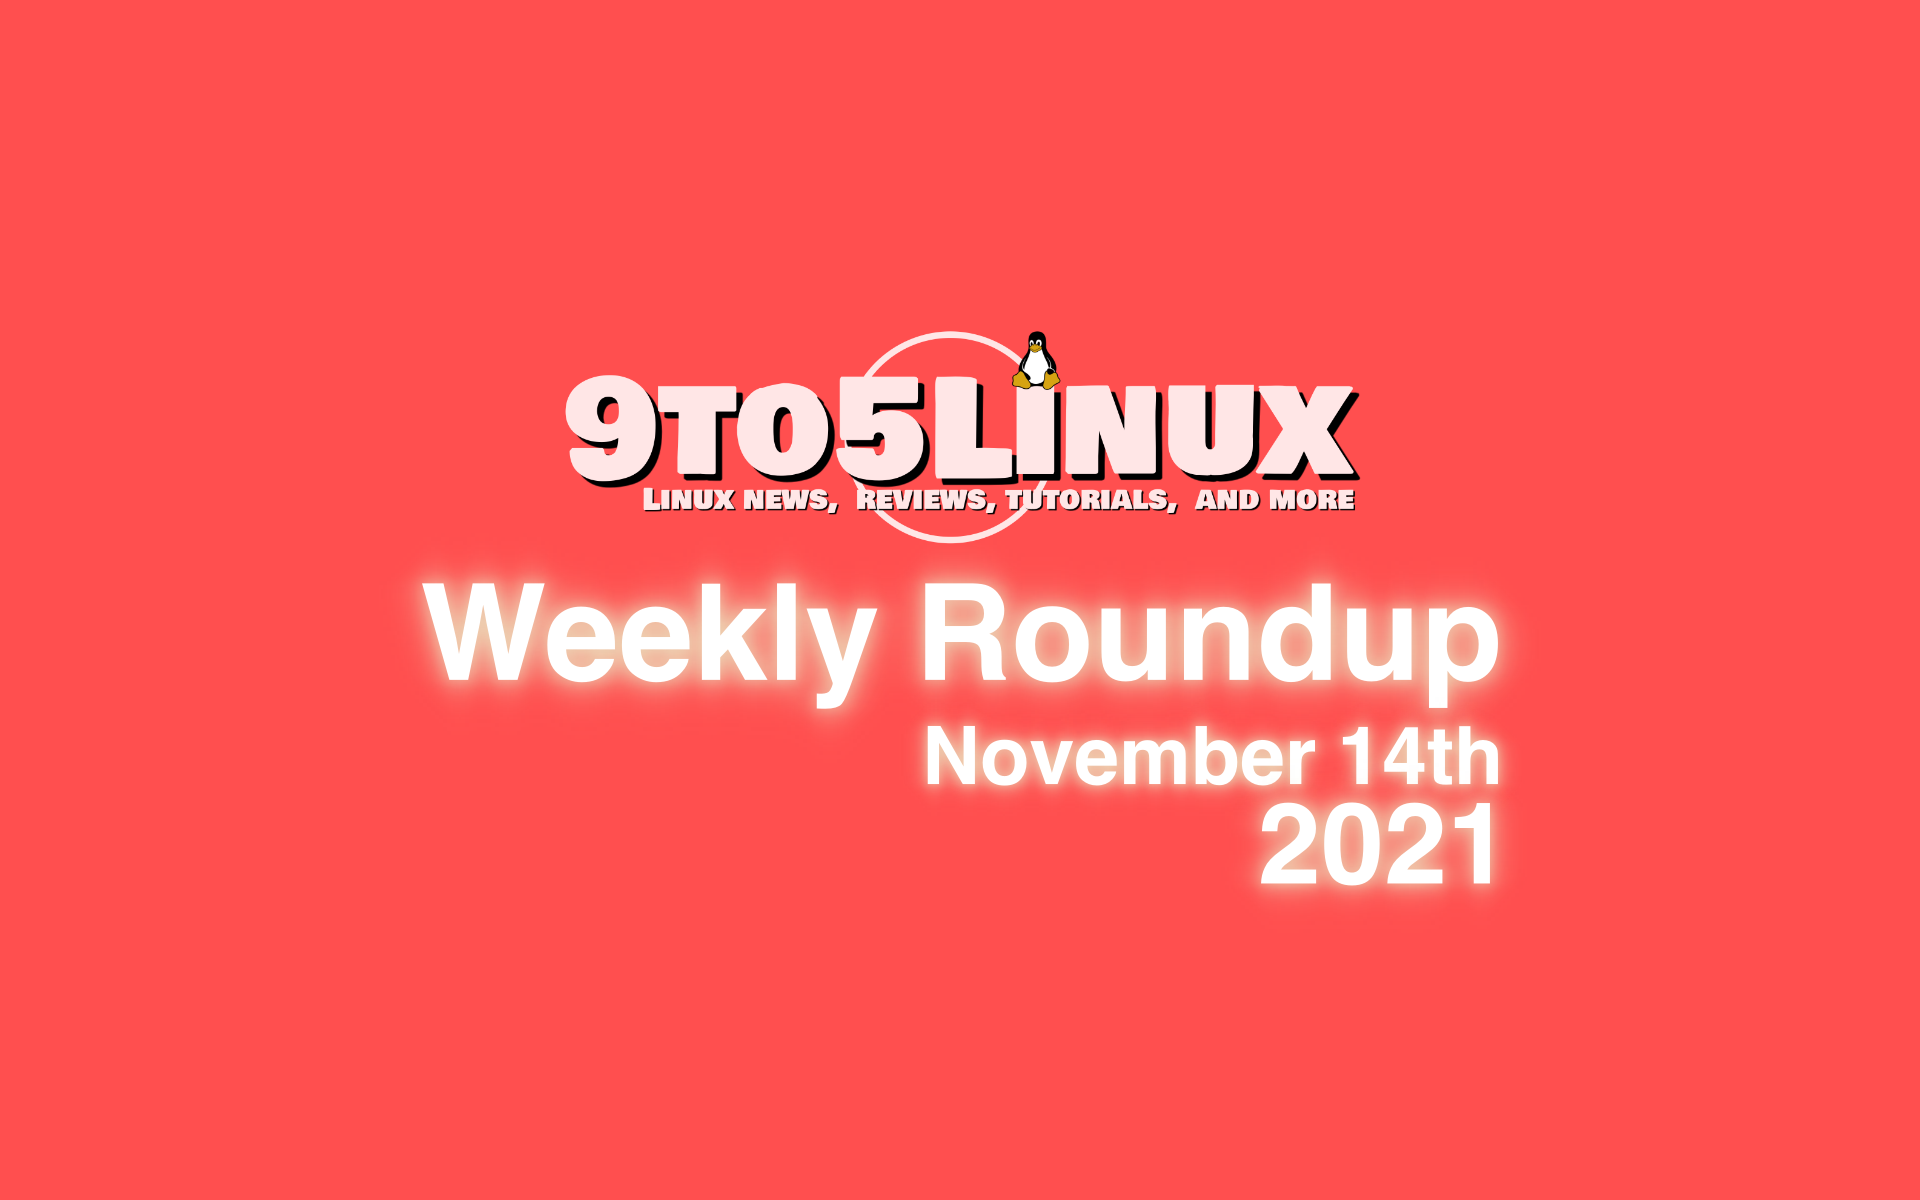 9to5Linux Weekly Roundup: November 14th, 2021